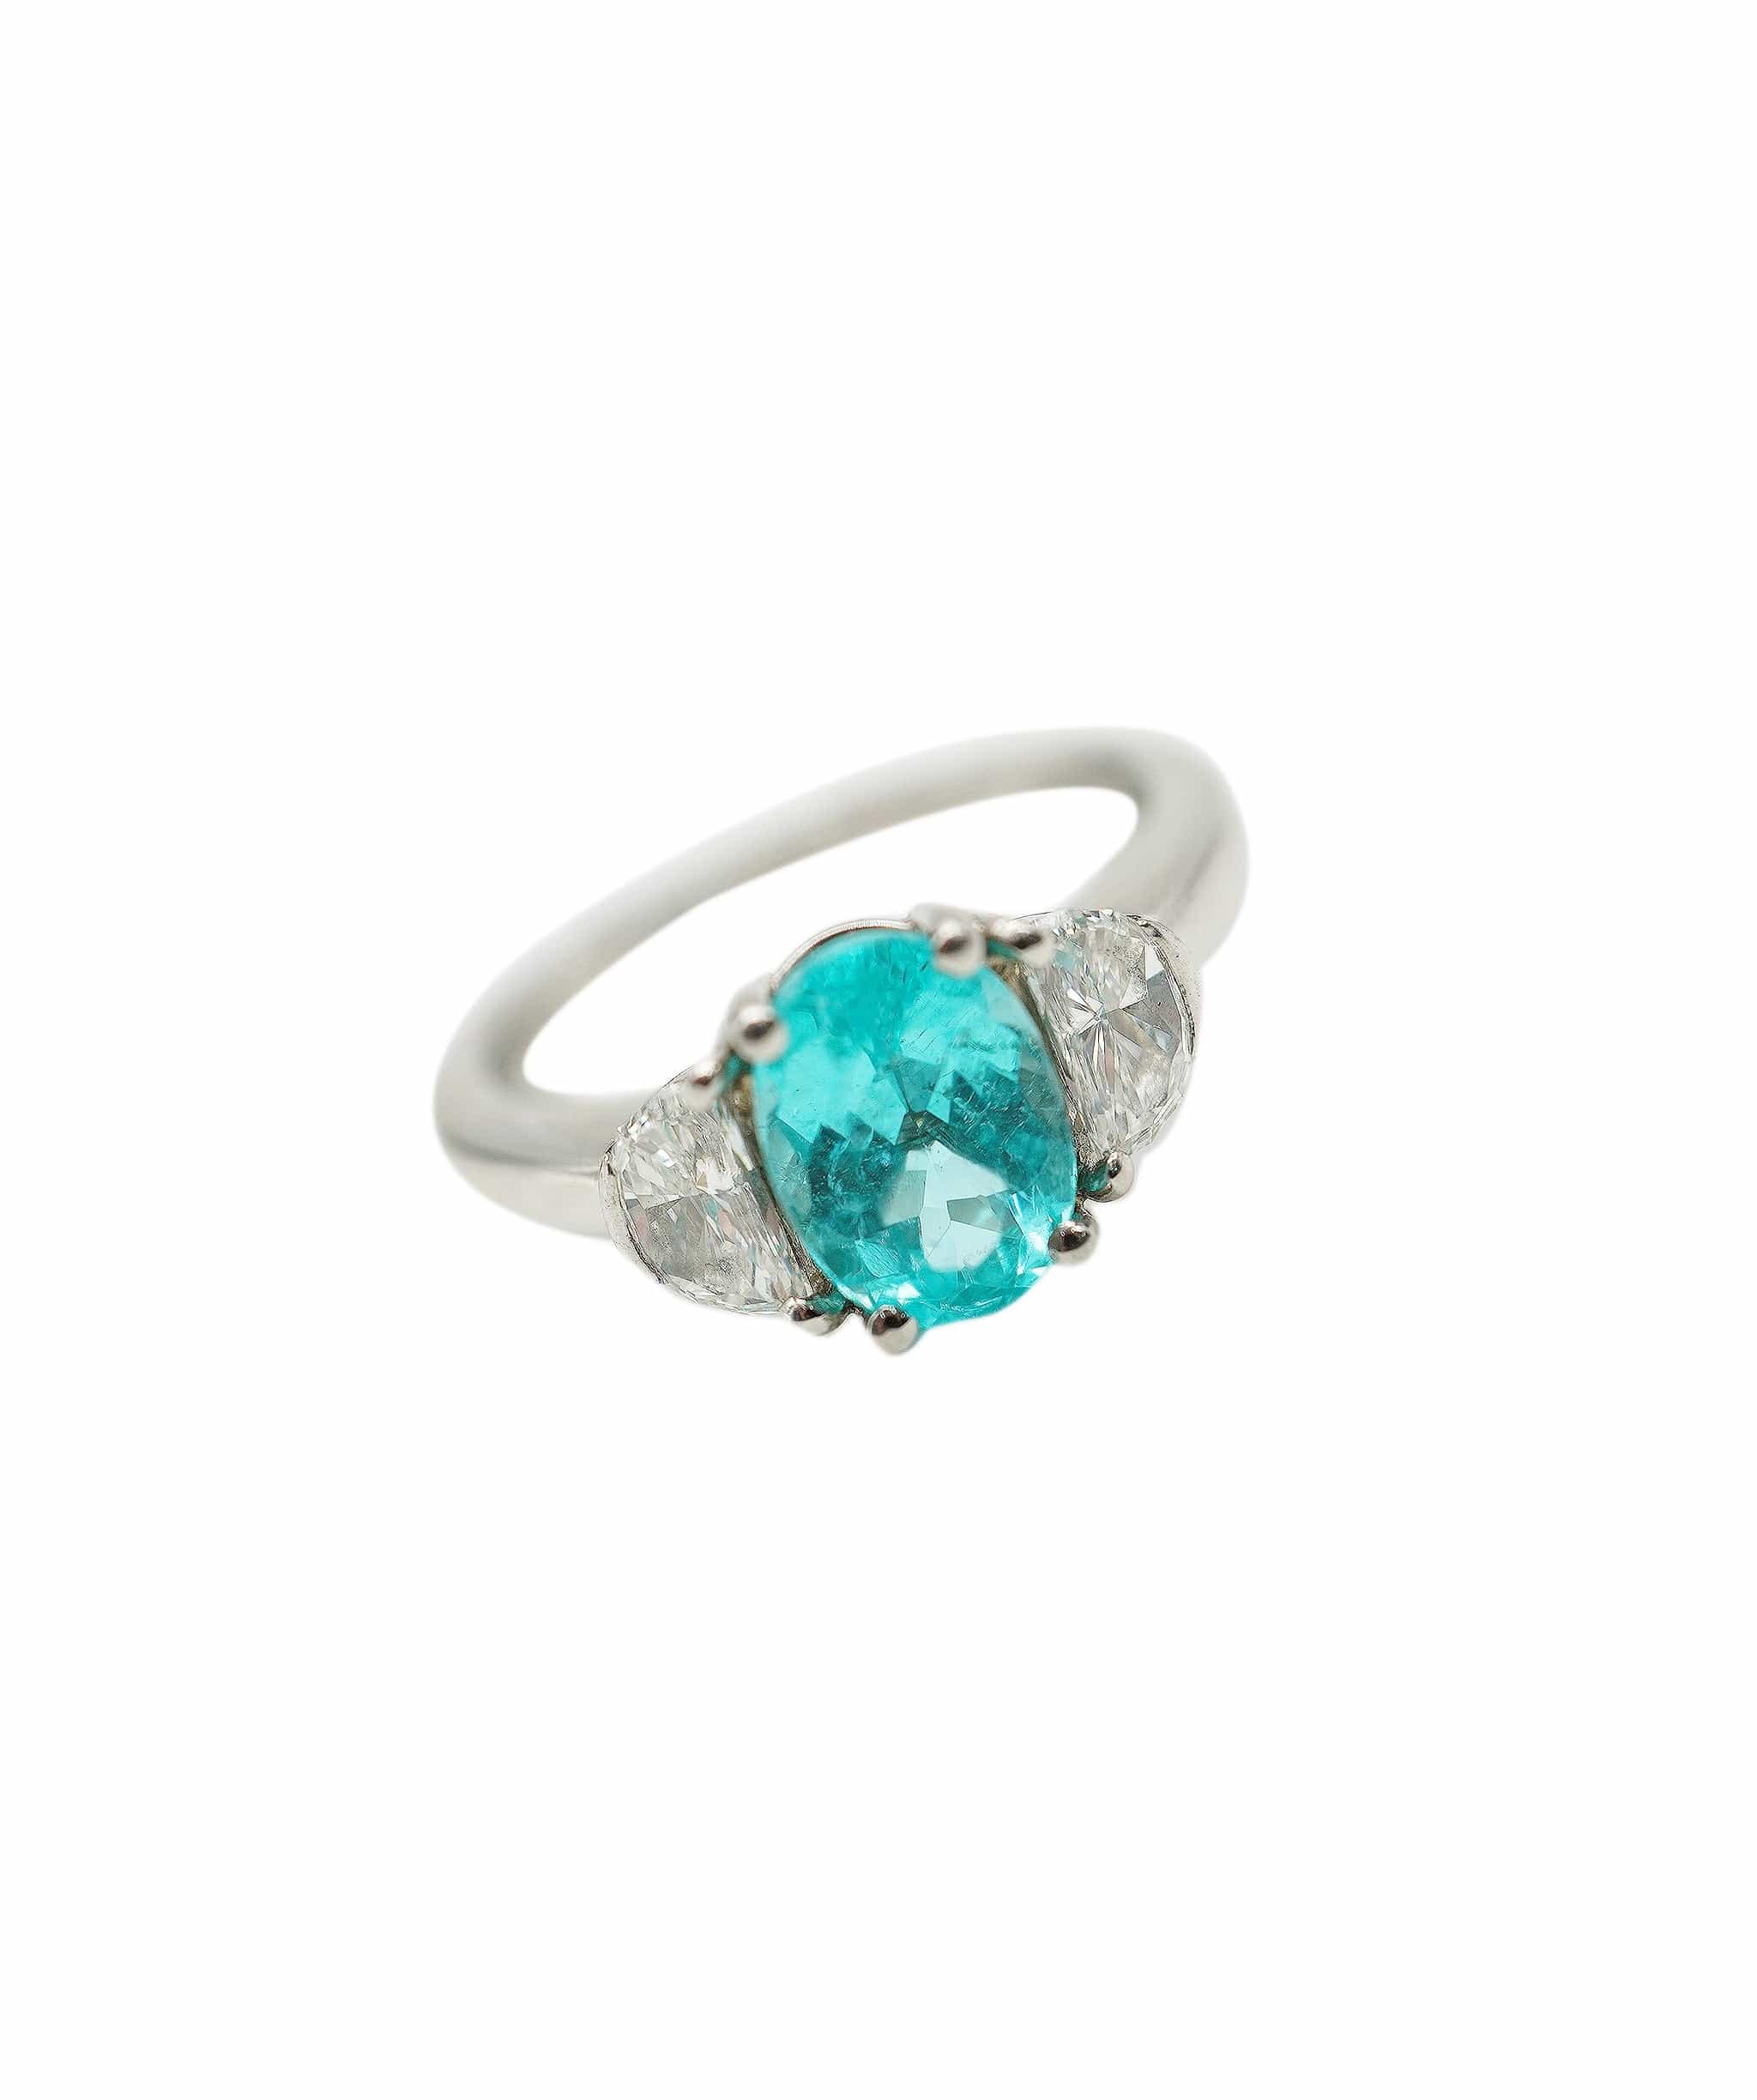 Luxury Promise Paraiba tourmaline (1.70cts) and diamond (0.75cts total) platinum ring AHC1480